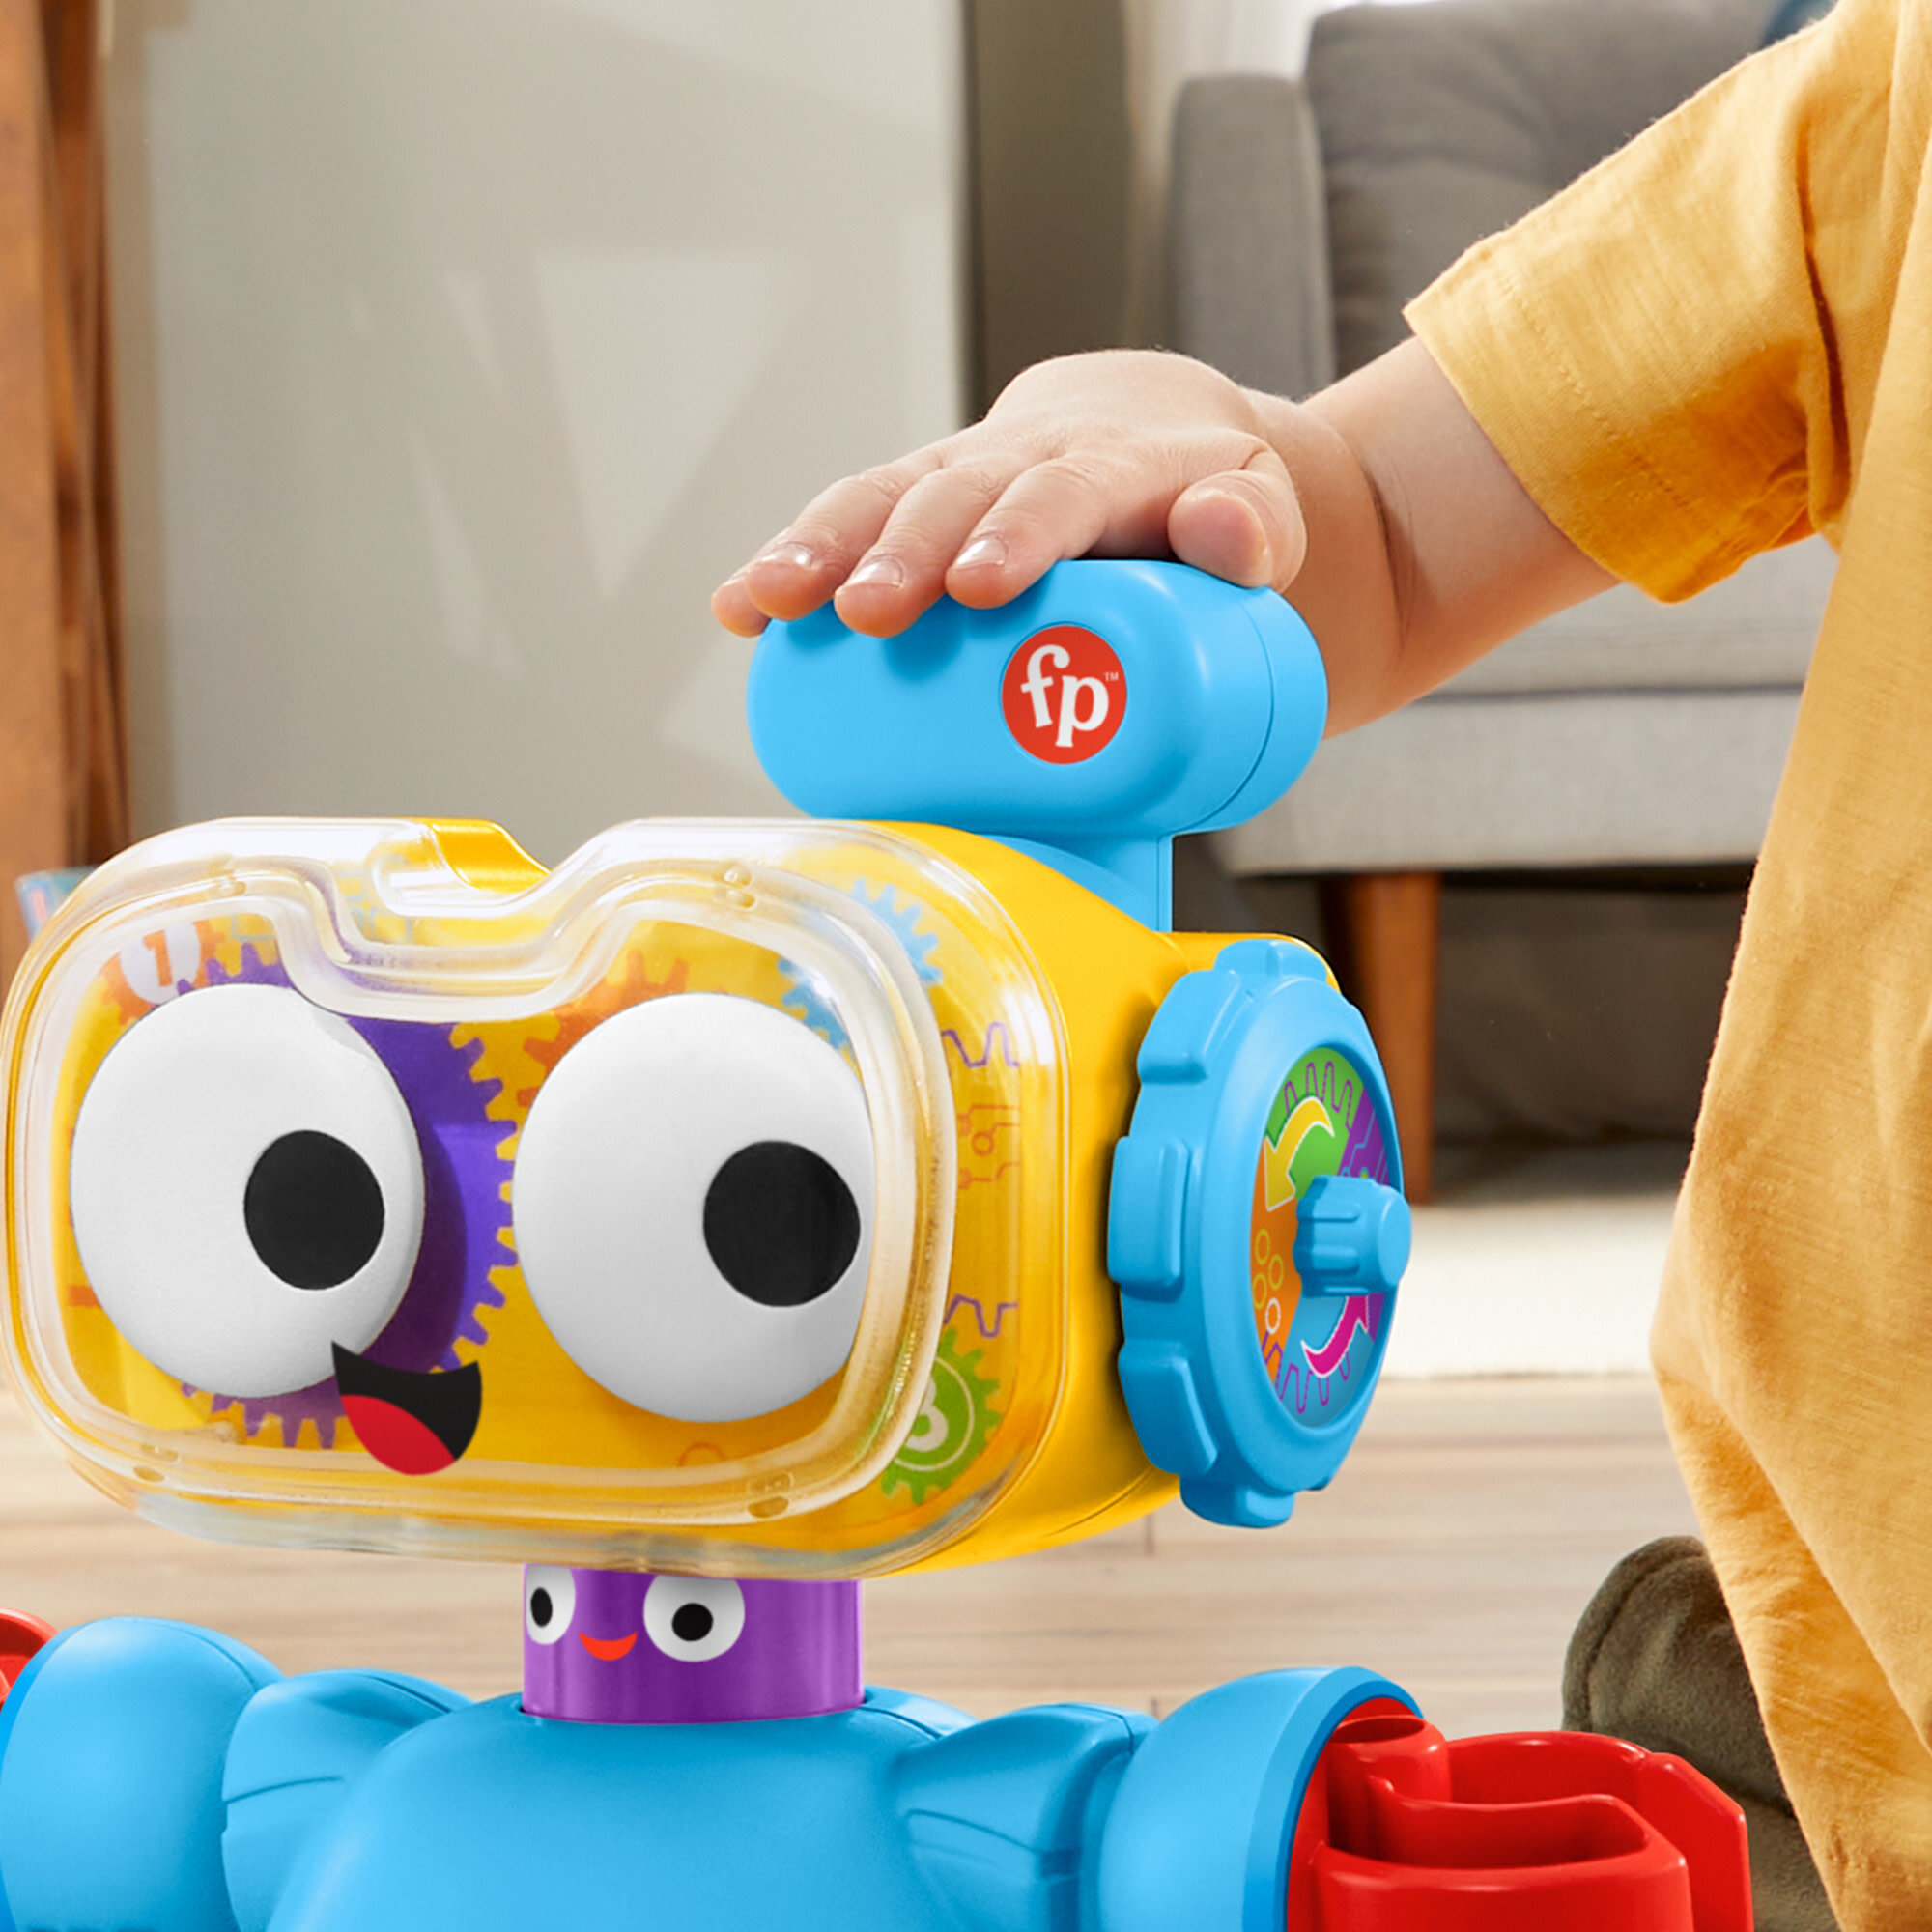 Fisher-Price 4-in-1 Learning Bot Interactive Toy Robot for Infants Toddlers and Preschool Kids - image 6 of 8